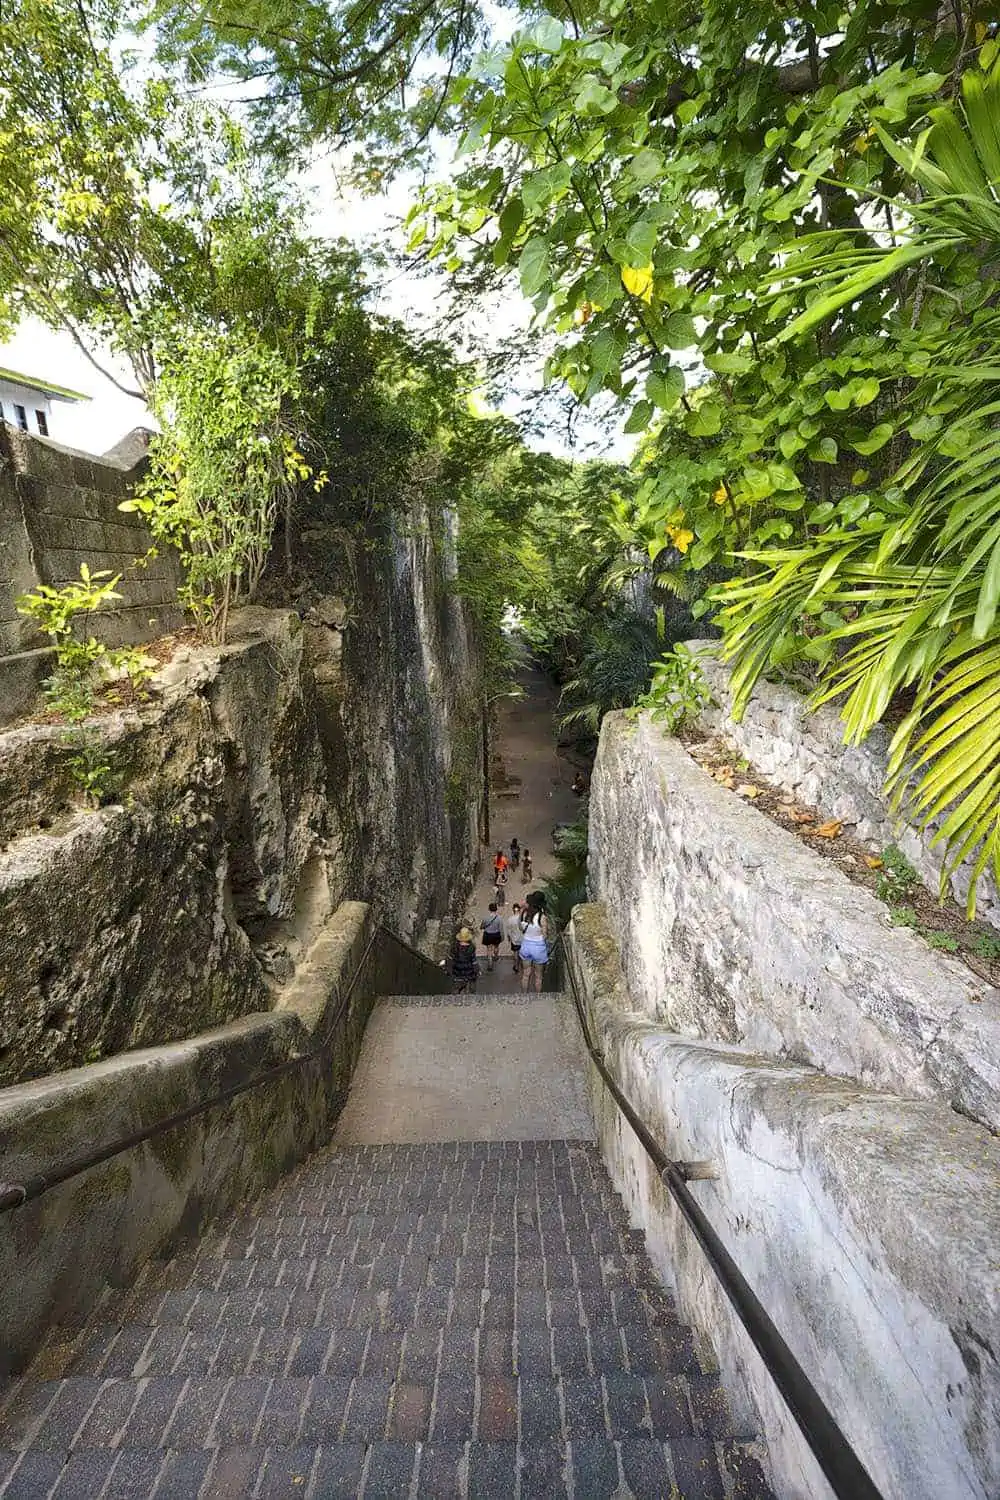 View of Queen's Staircase in Nassau Bahamas.